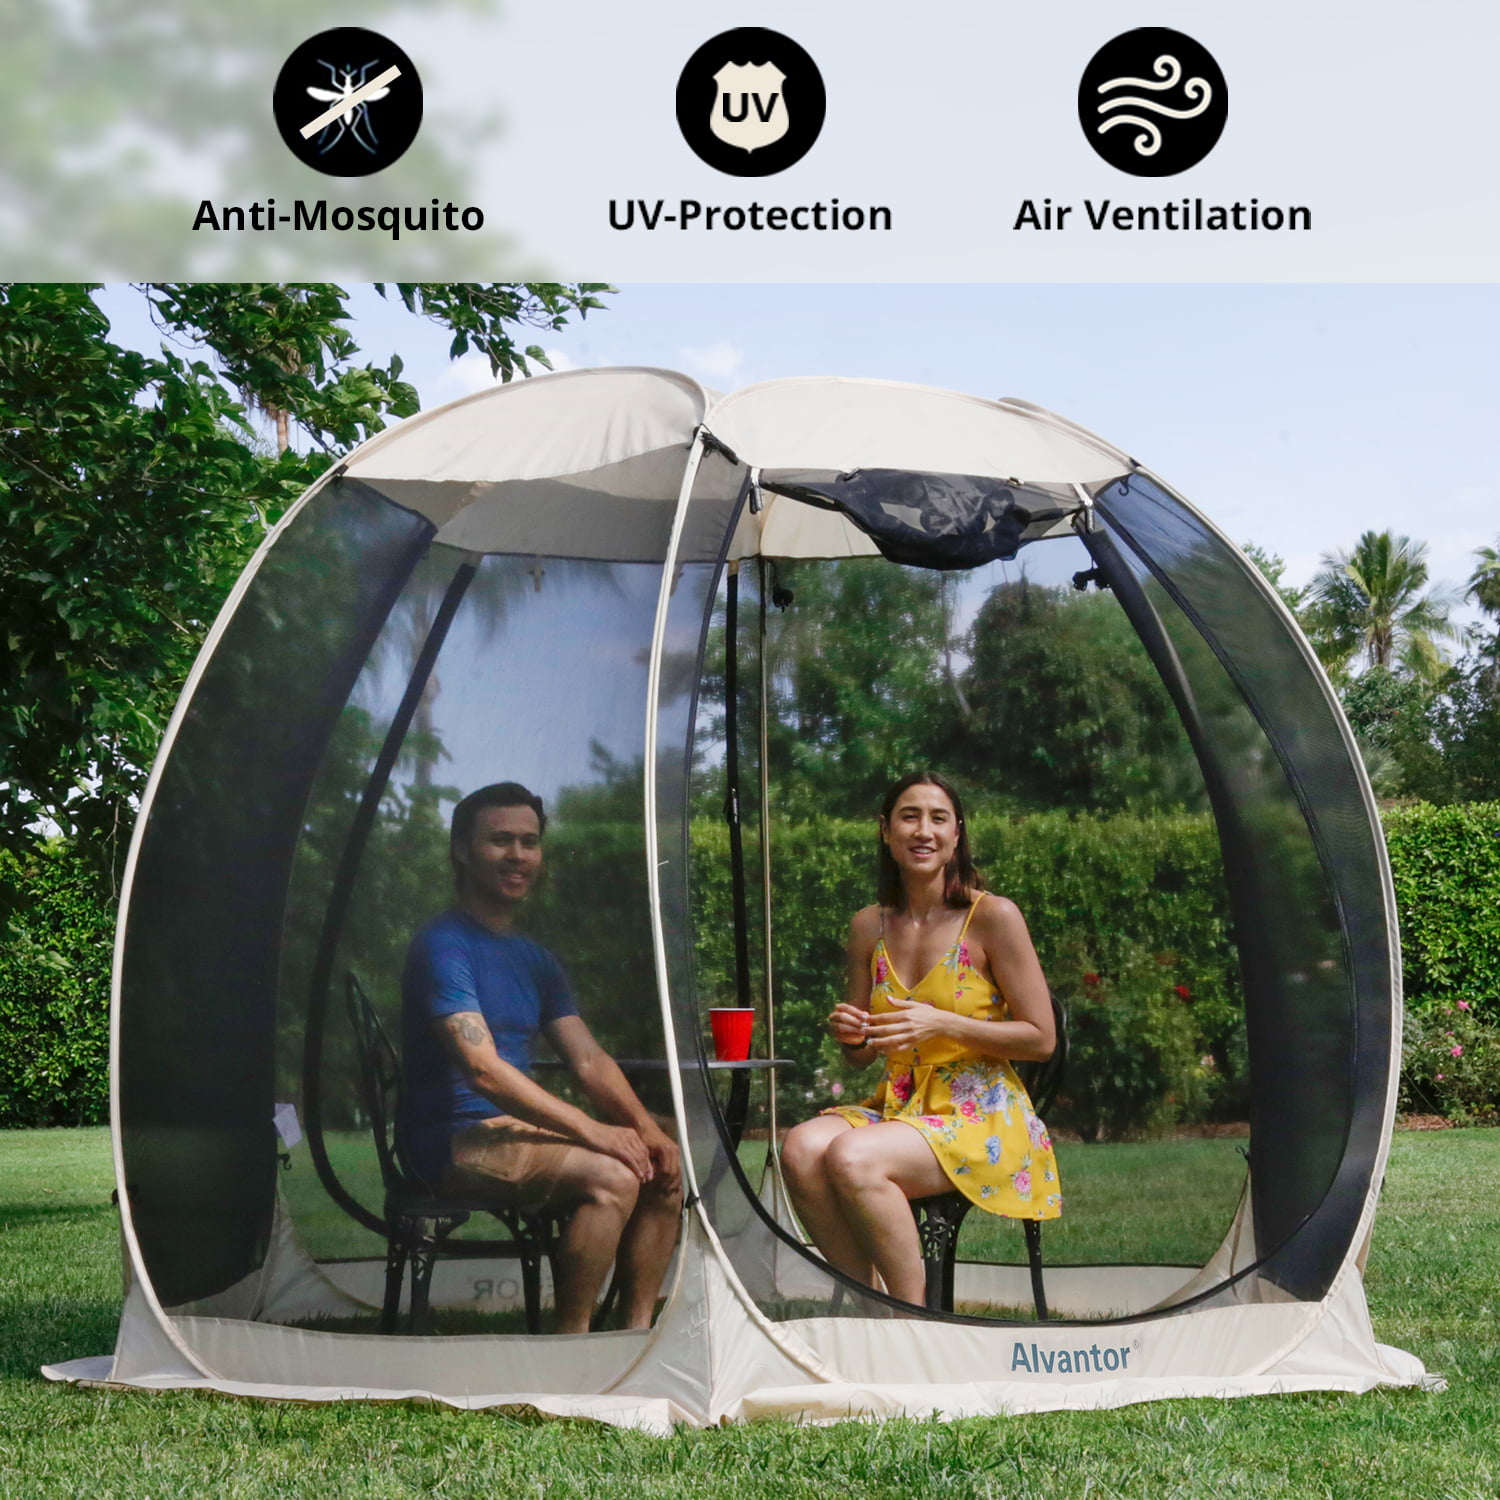 Details about   Alvantor 10' x 10' Pop Up Screen House Gazebo w/ Mosquito Netting Portable Beige 